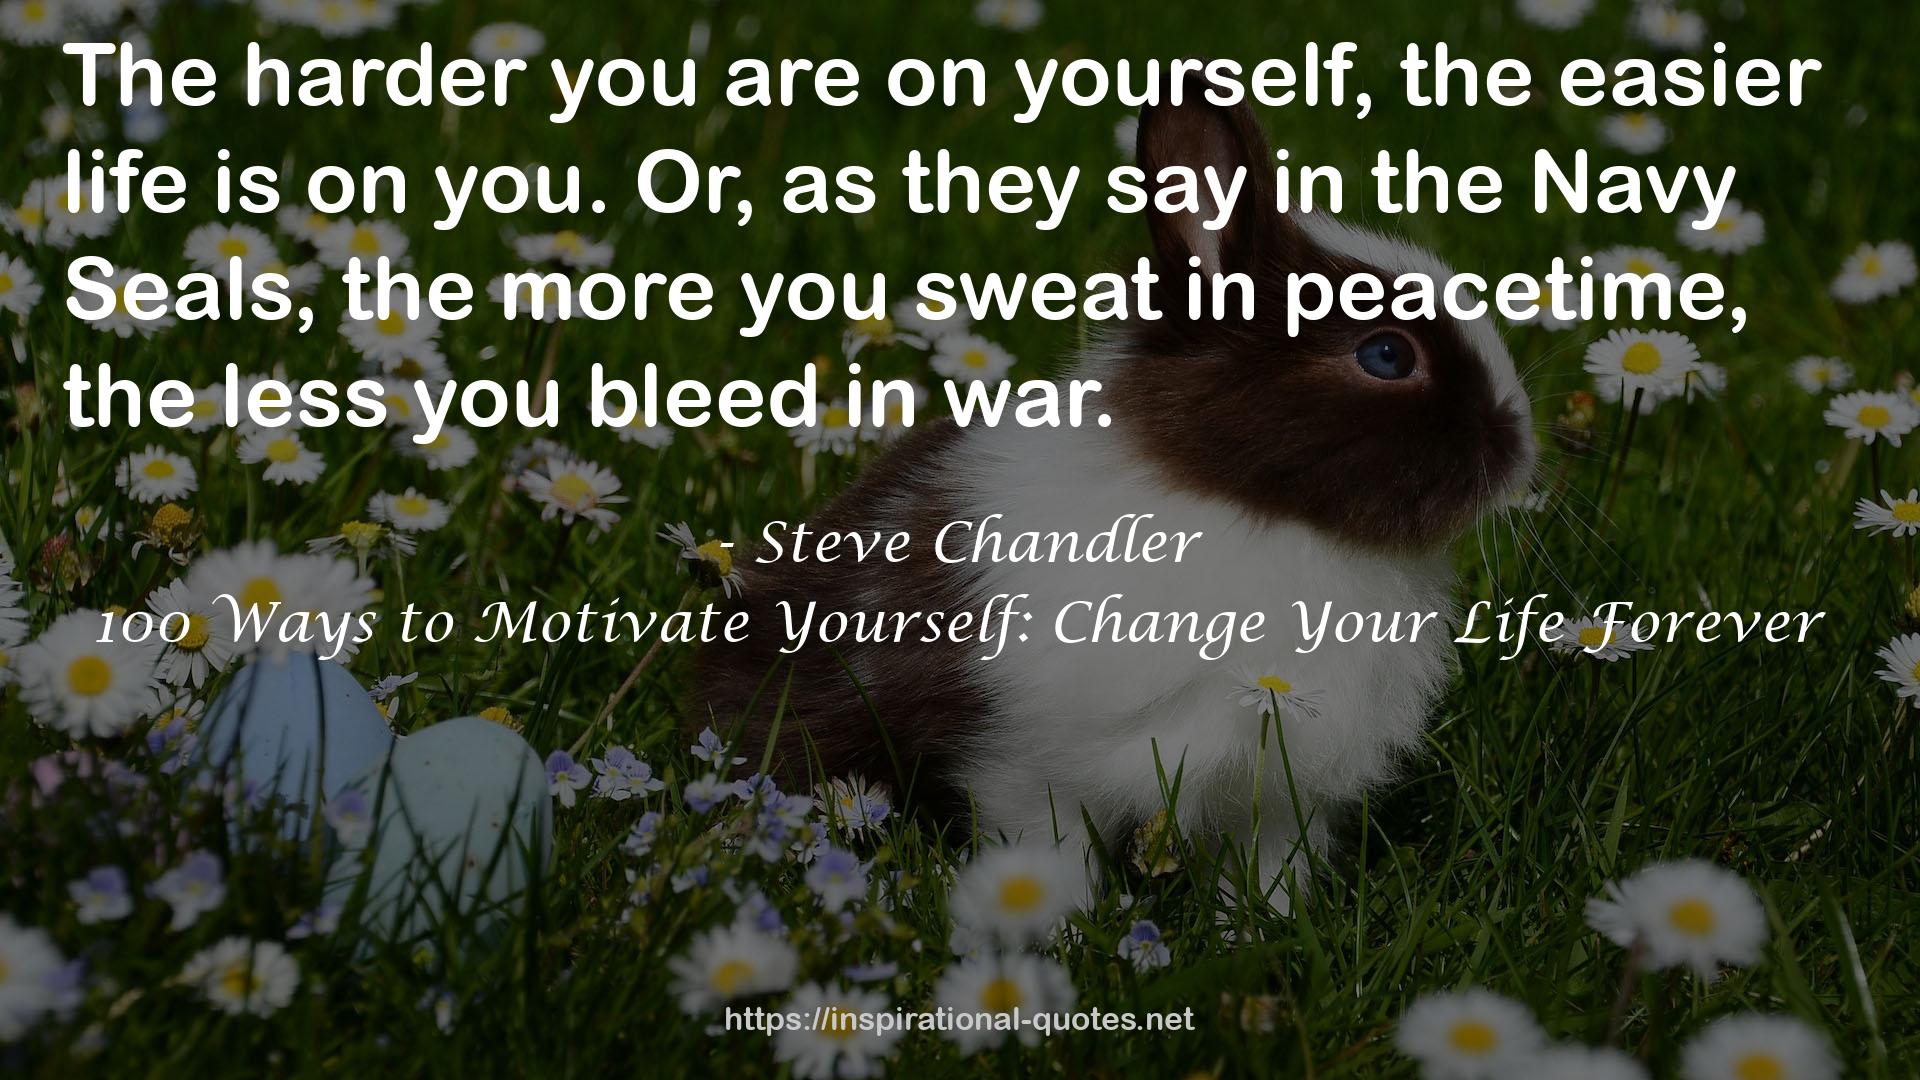 100 Ways to Motivate Yourself: Change Your Life Forever QUOTES